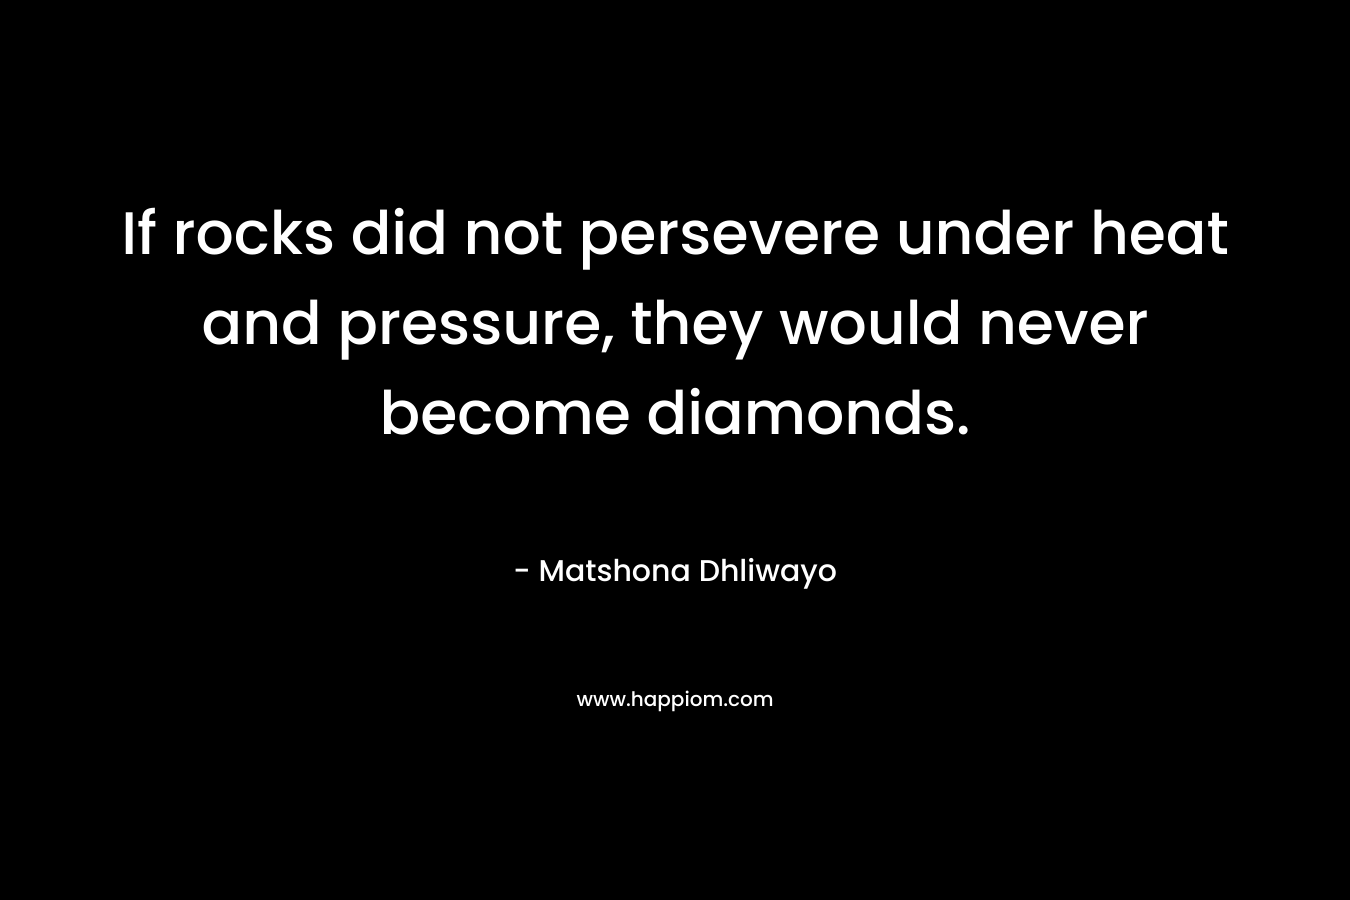 If rocks did not persevere under heat and pressure, they would never become diamonds.